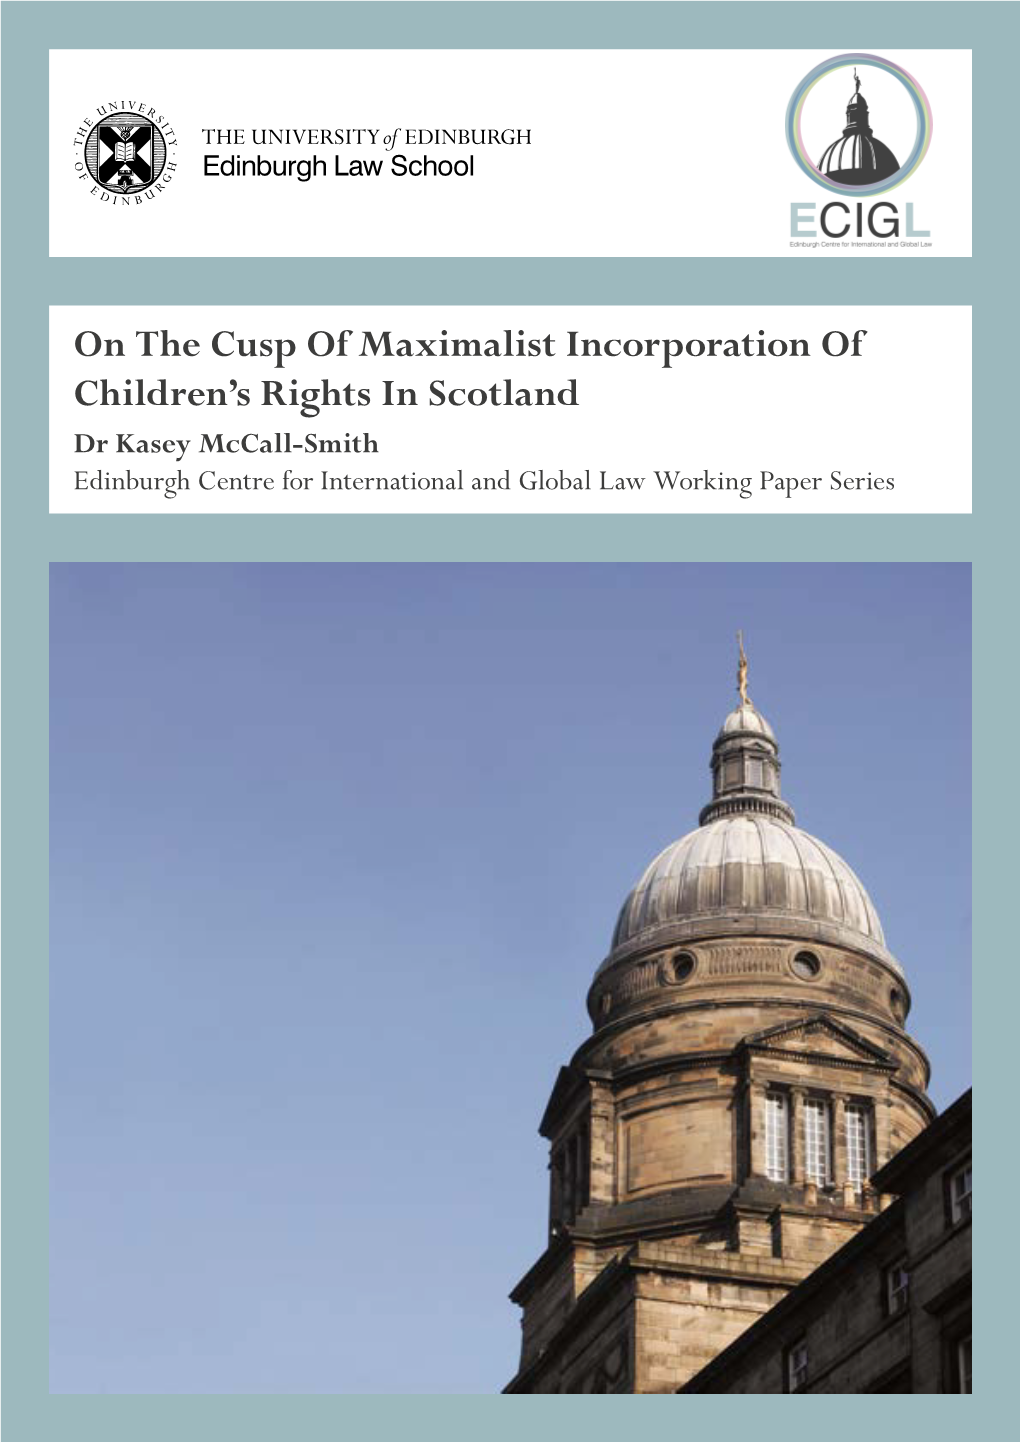 On the Cusp of Maximalist Incorporation of Children's Rights